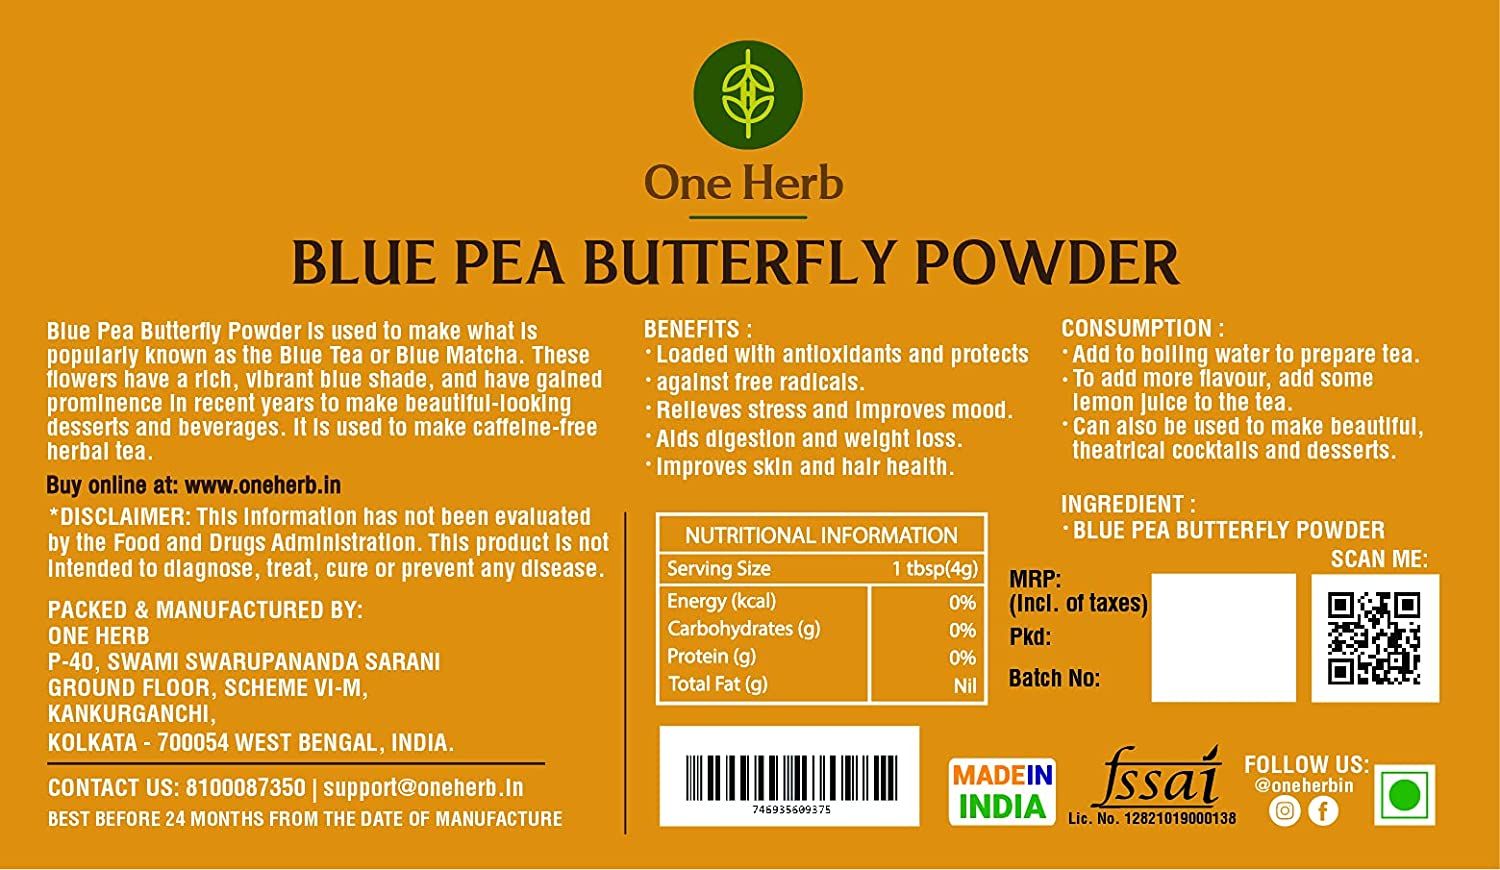 One Herb Blue Pea Tea Butterfly Powder Image